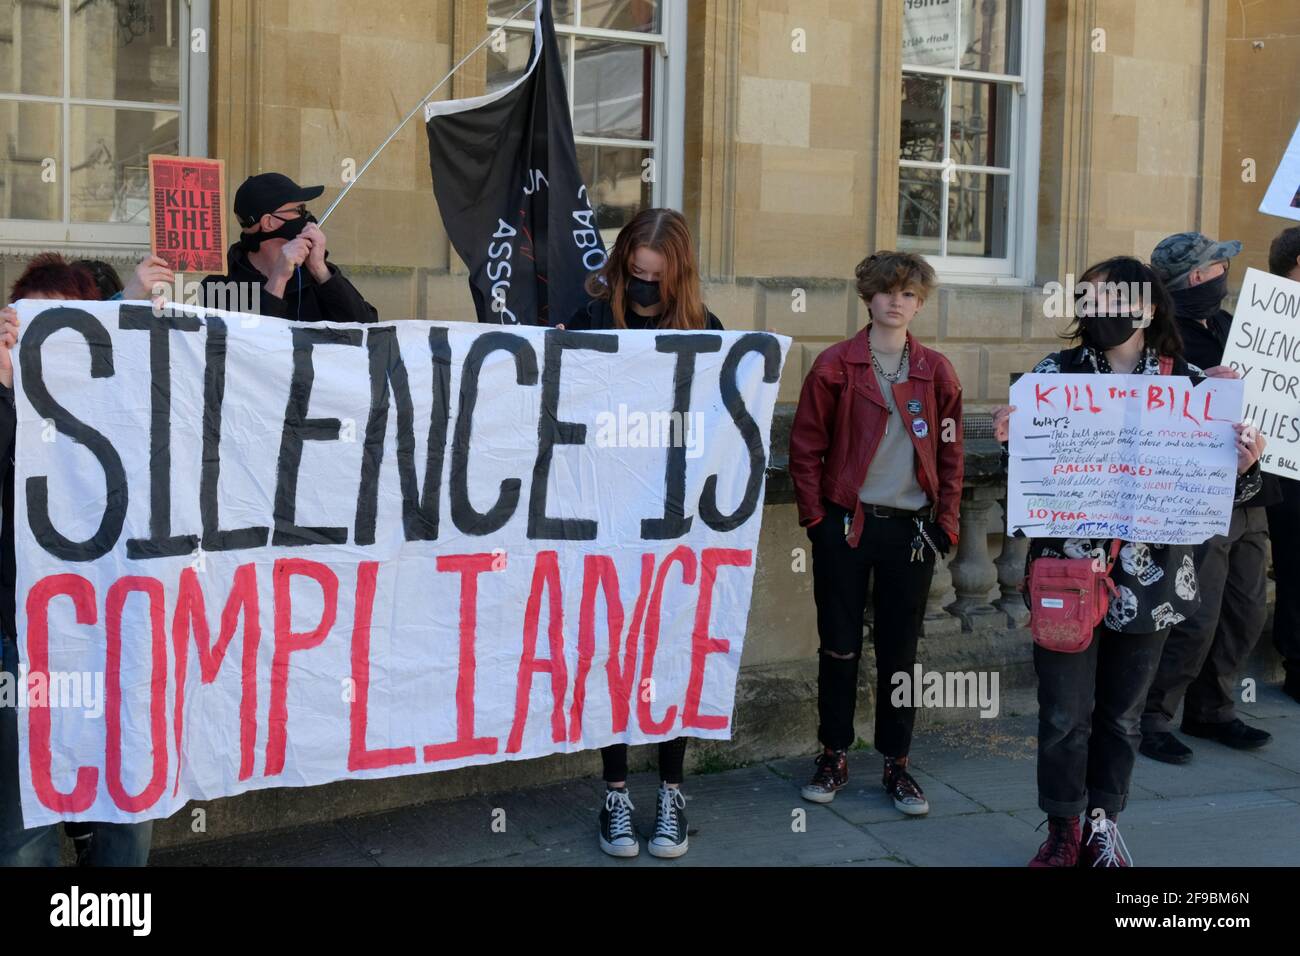 Abbey Courtyard, Bath, UK. 17th Apr, 2021. Protestors gather in the Bath Abbey Courtyard to express discontent with the Governments changes to the right to protest. This is one of many protests around the UK today. Credit: JMF News/Alamy Live News Stock Photo